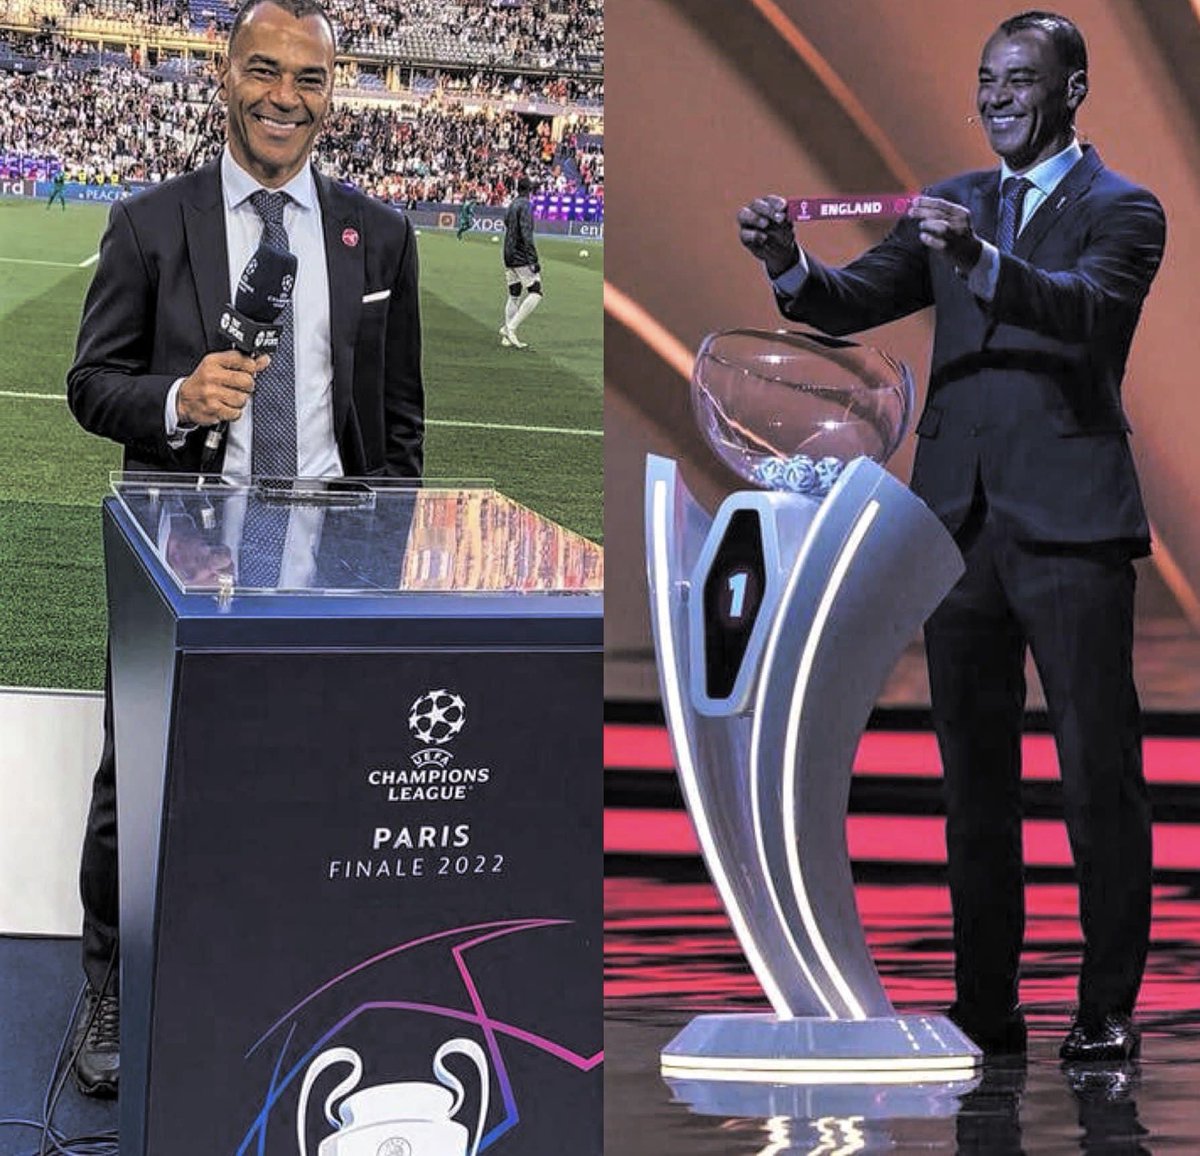 Cafu: 'I am afraid, the more we have Brazilians moving to the Premier League, the less chances for Brazil to win the World Cup. Imagine being brainwashed by the media every week that you are the best in the world, meanwhile you are not near the best.

I prefer La Liga, because…